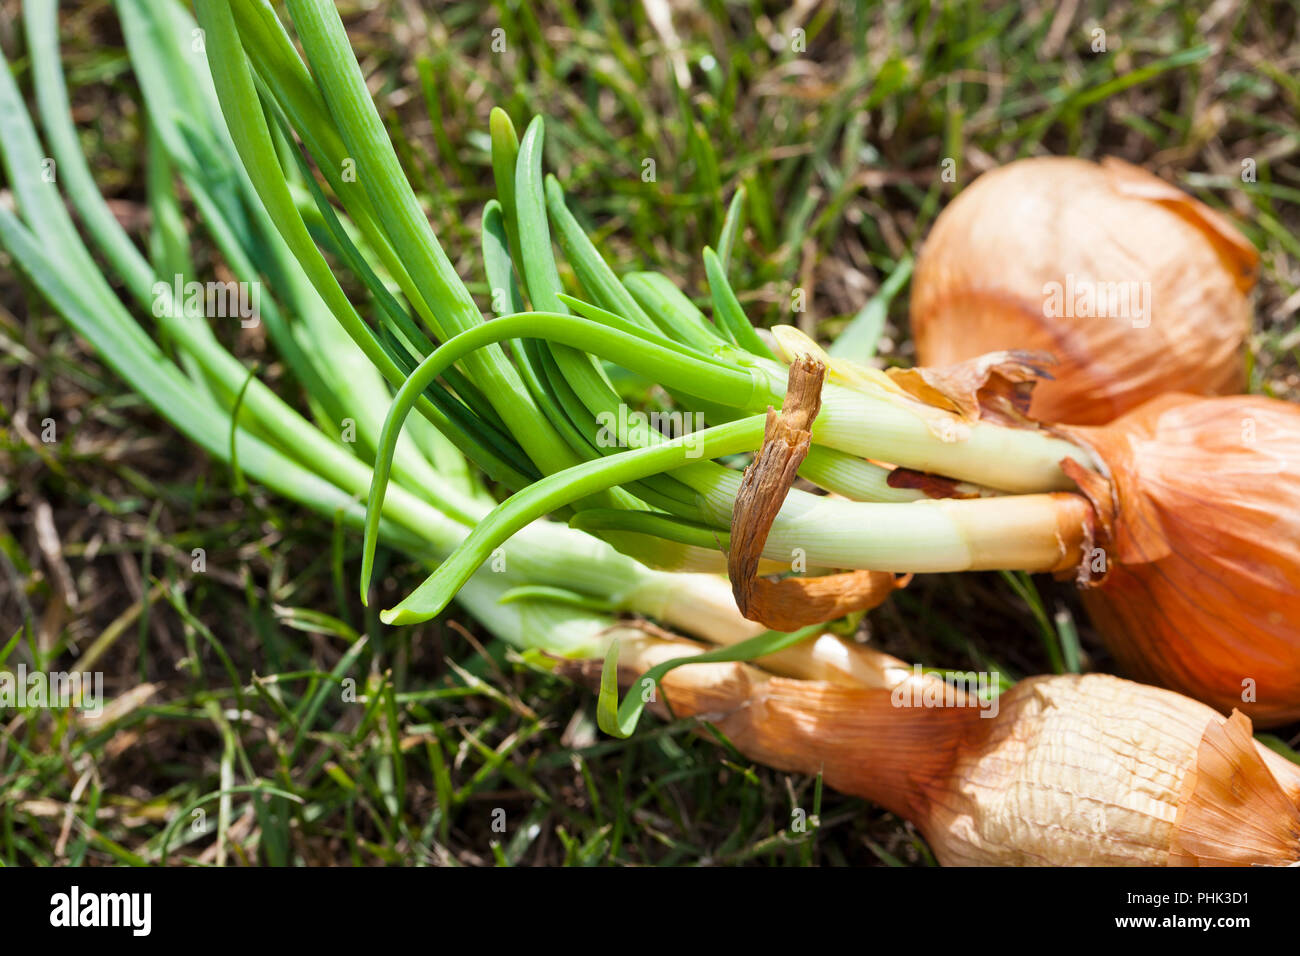 Sprouted orange onion and not planted in soil, closeup Stock Photo